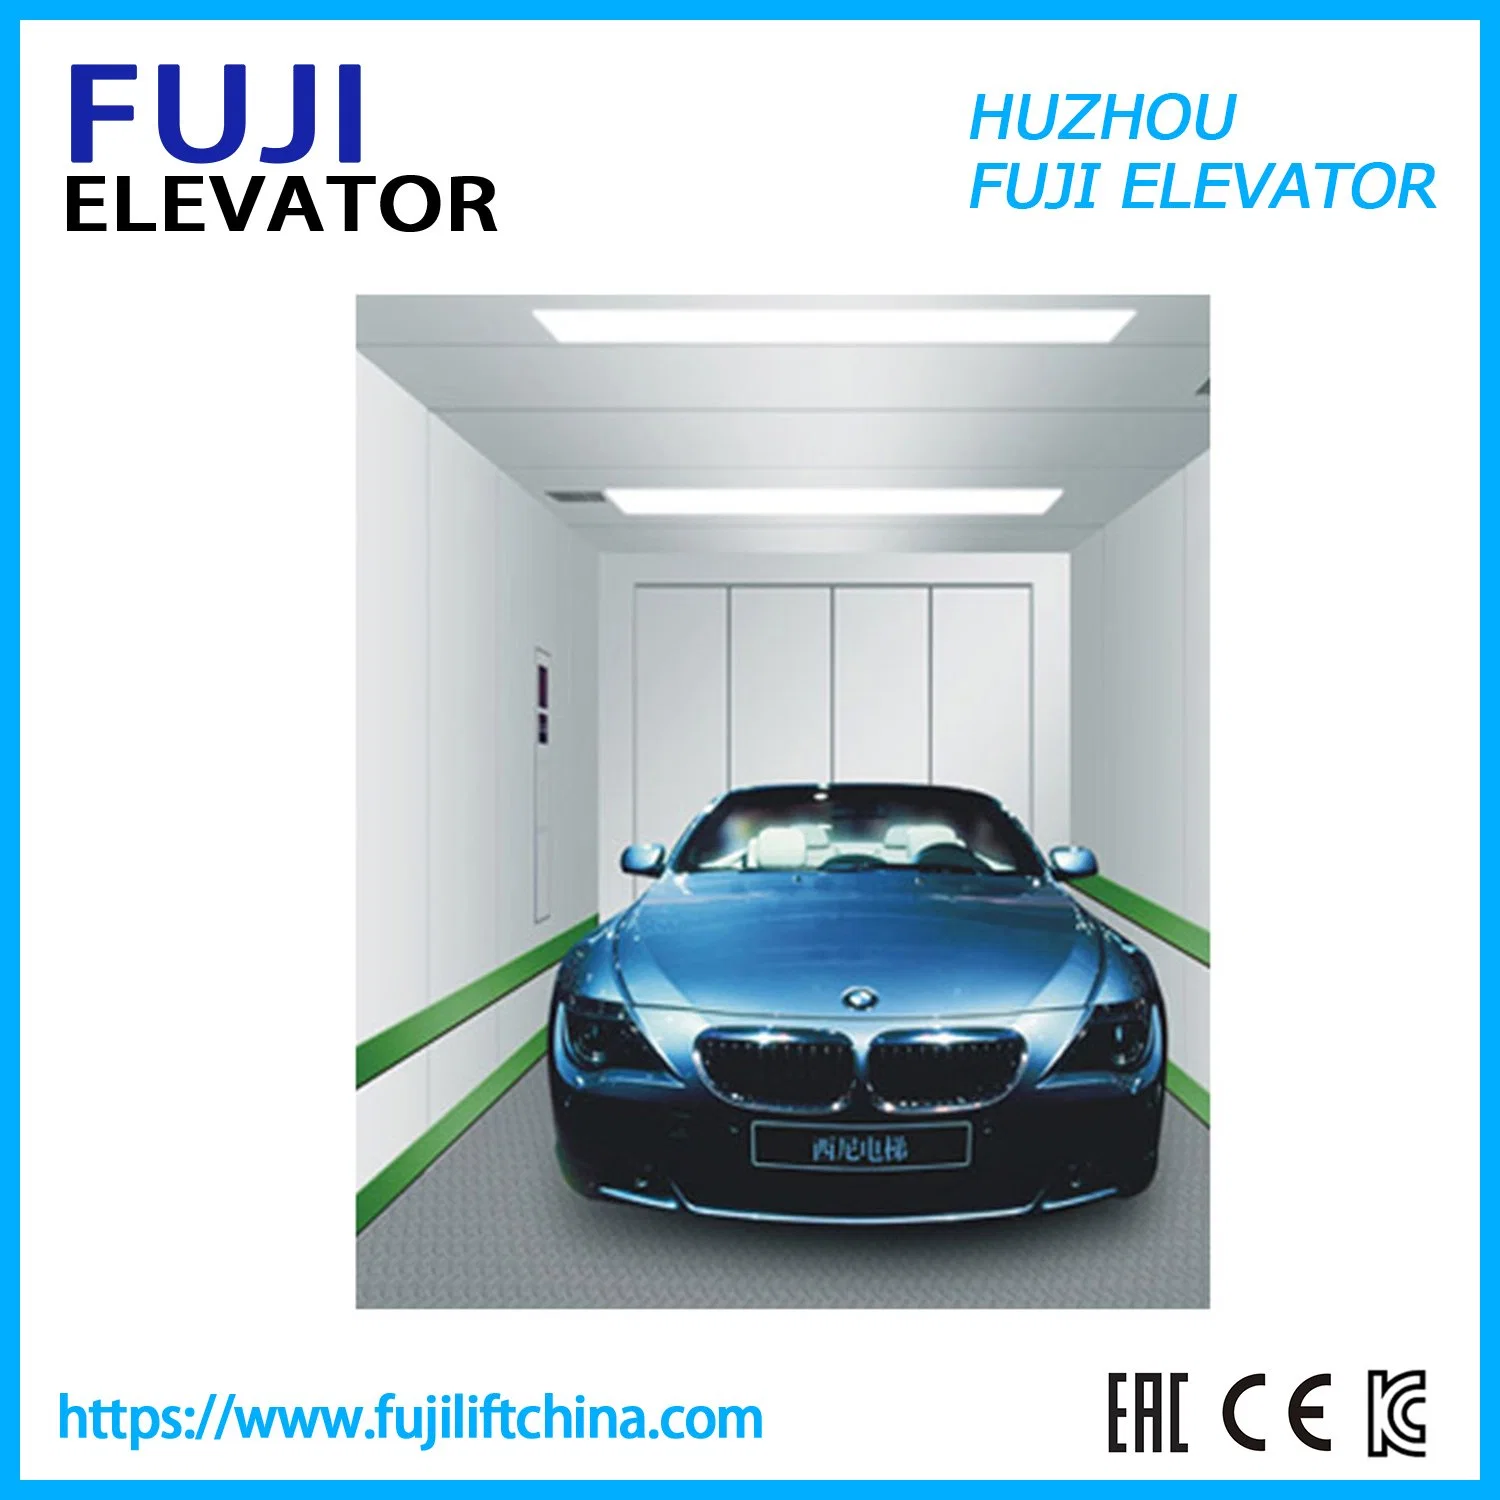 FUJI Car Lift Freight Elevator Goods Elevator Car Elevator with Good Price From China Factory Manufacturer Vvvf Control